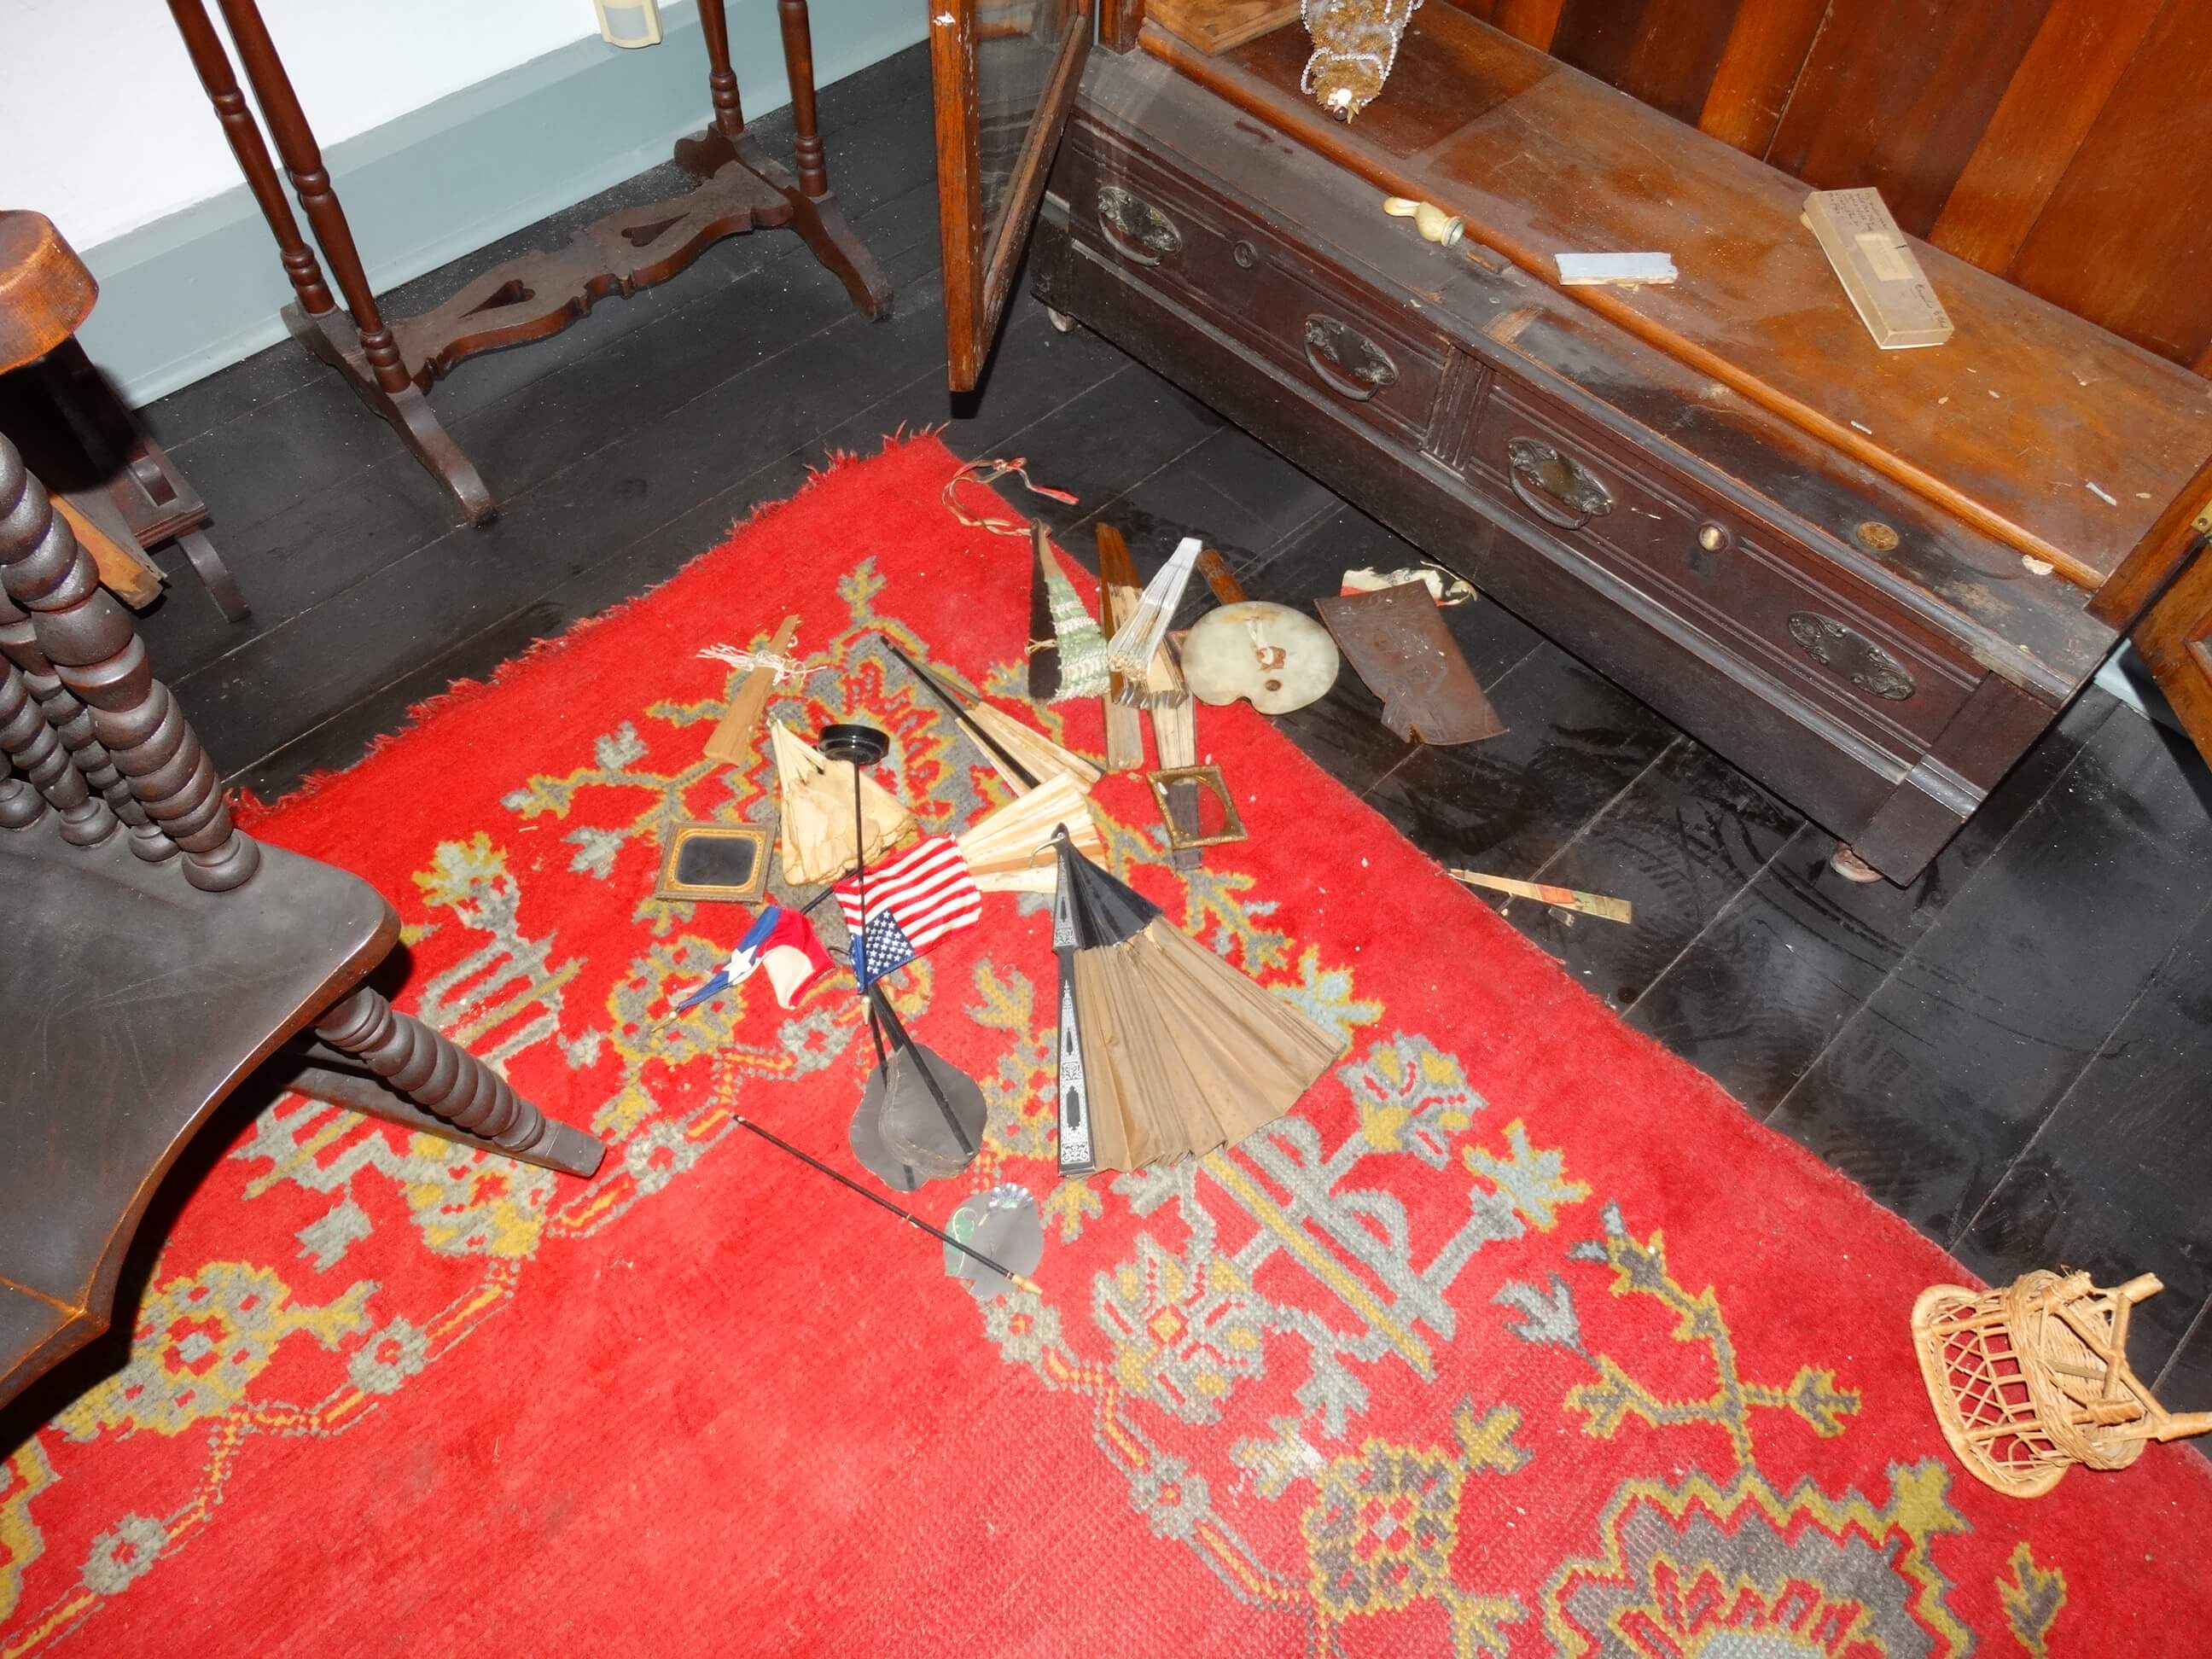 Objects thrown on the dusty floor of the music room by vandals